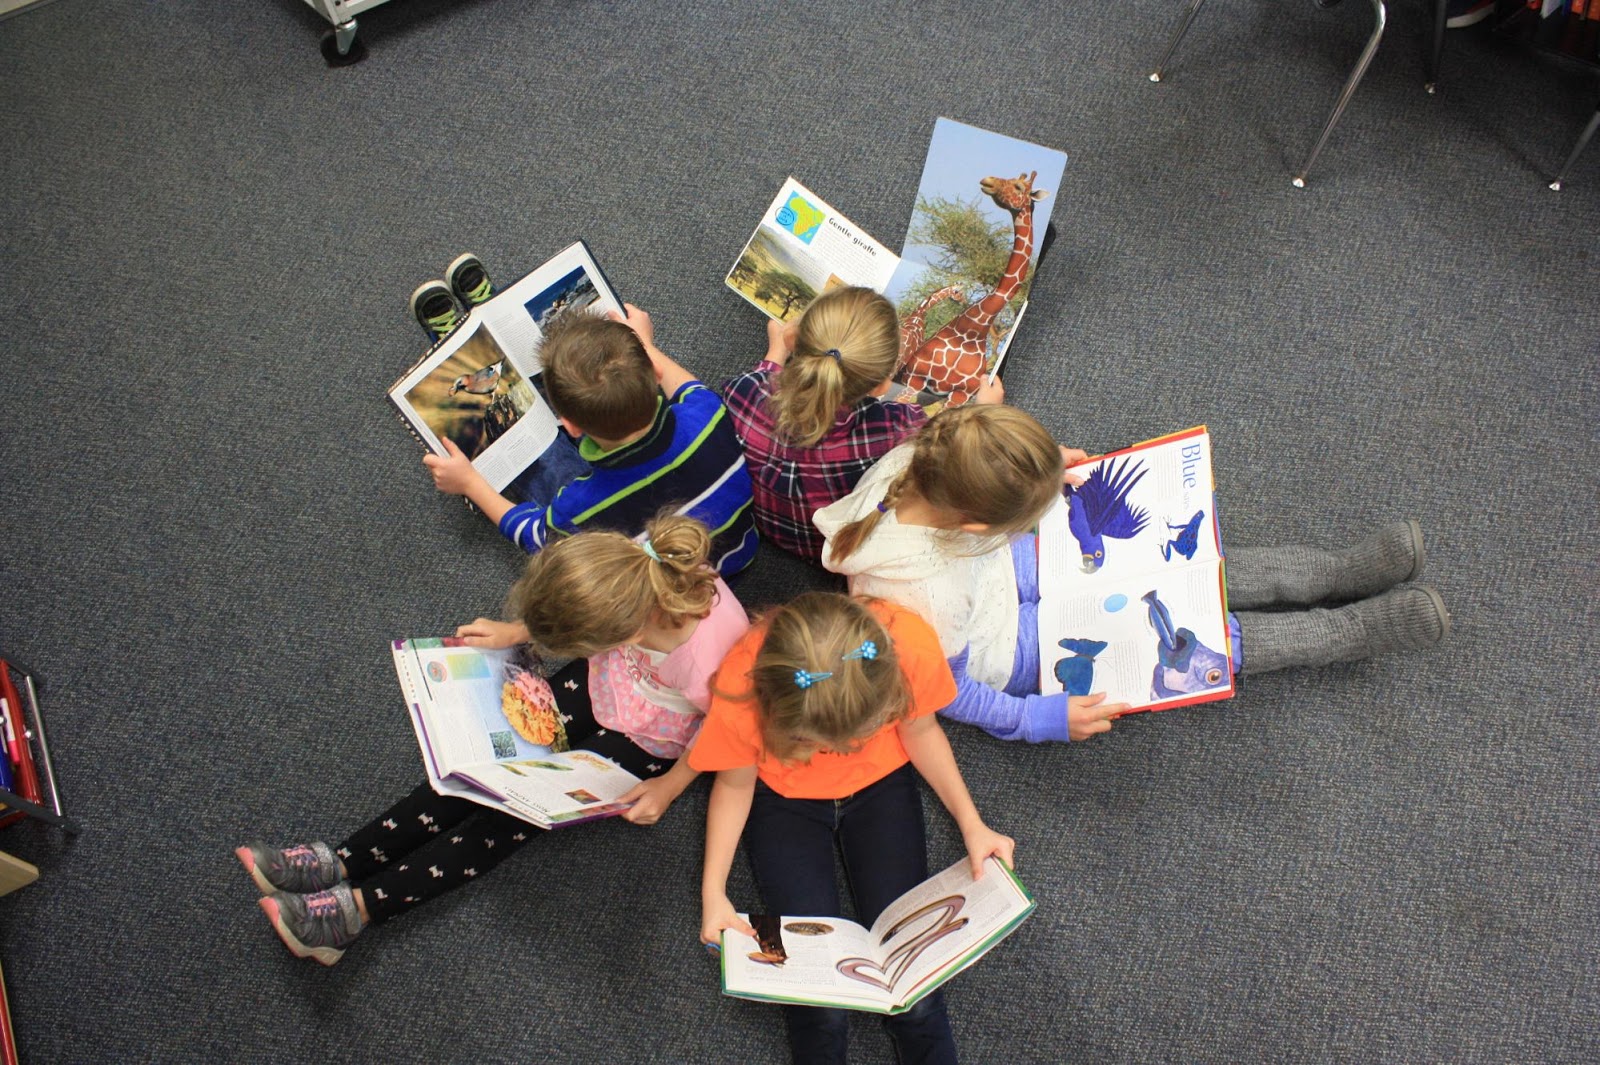 Students in a circle with their back against each other holding books